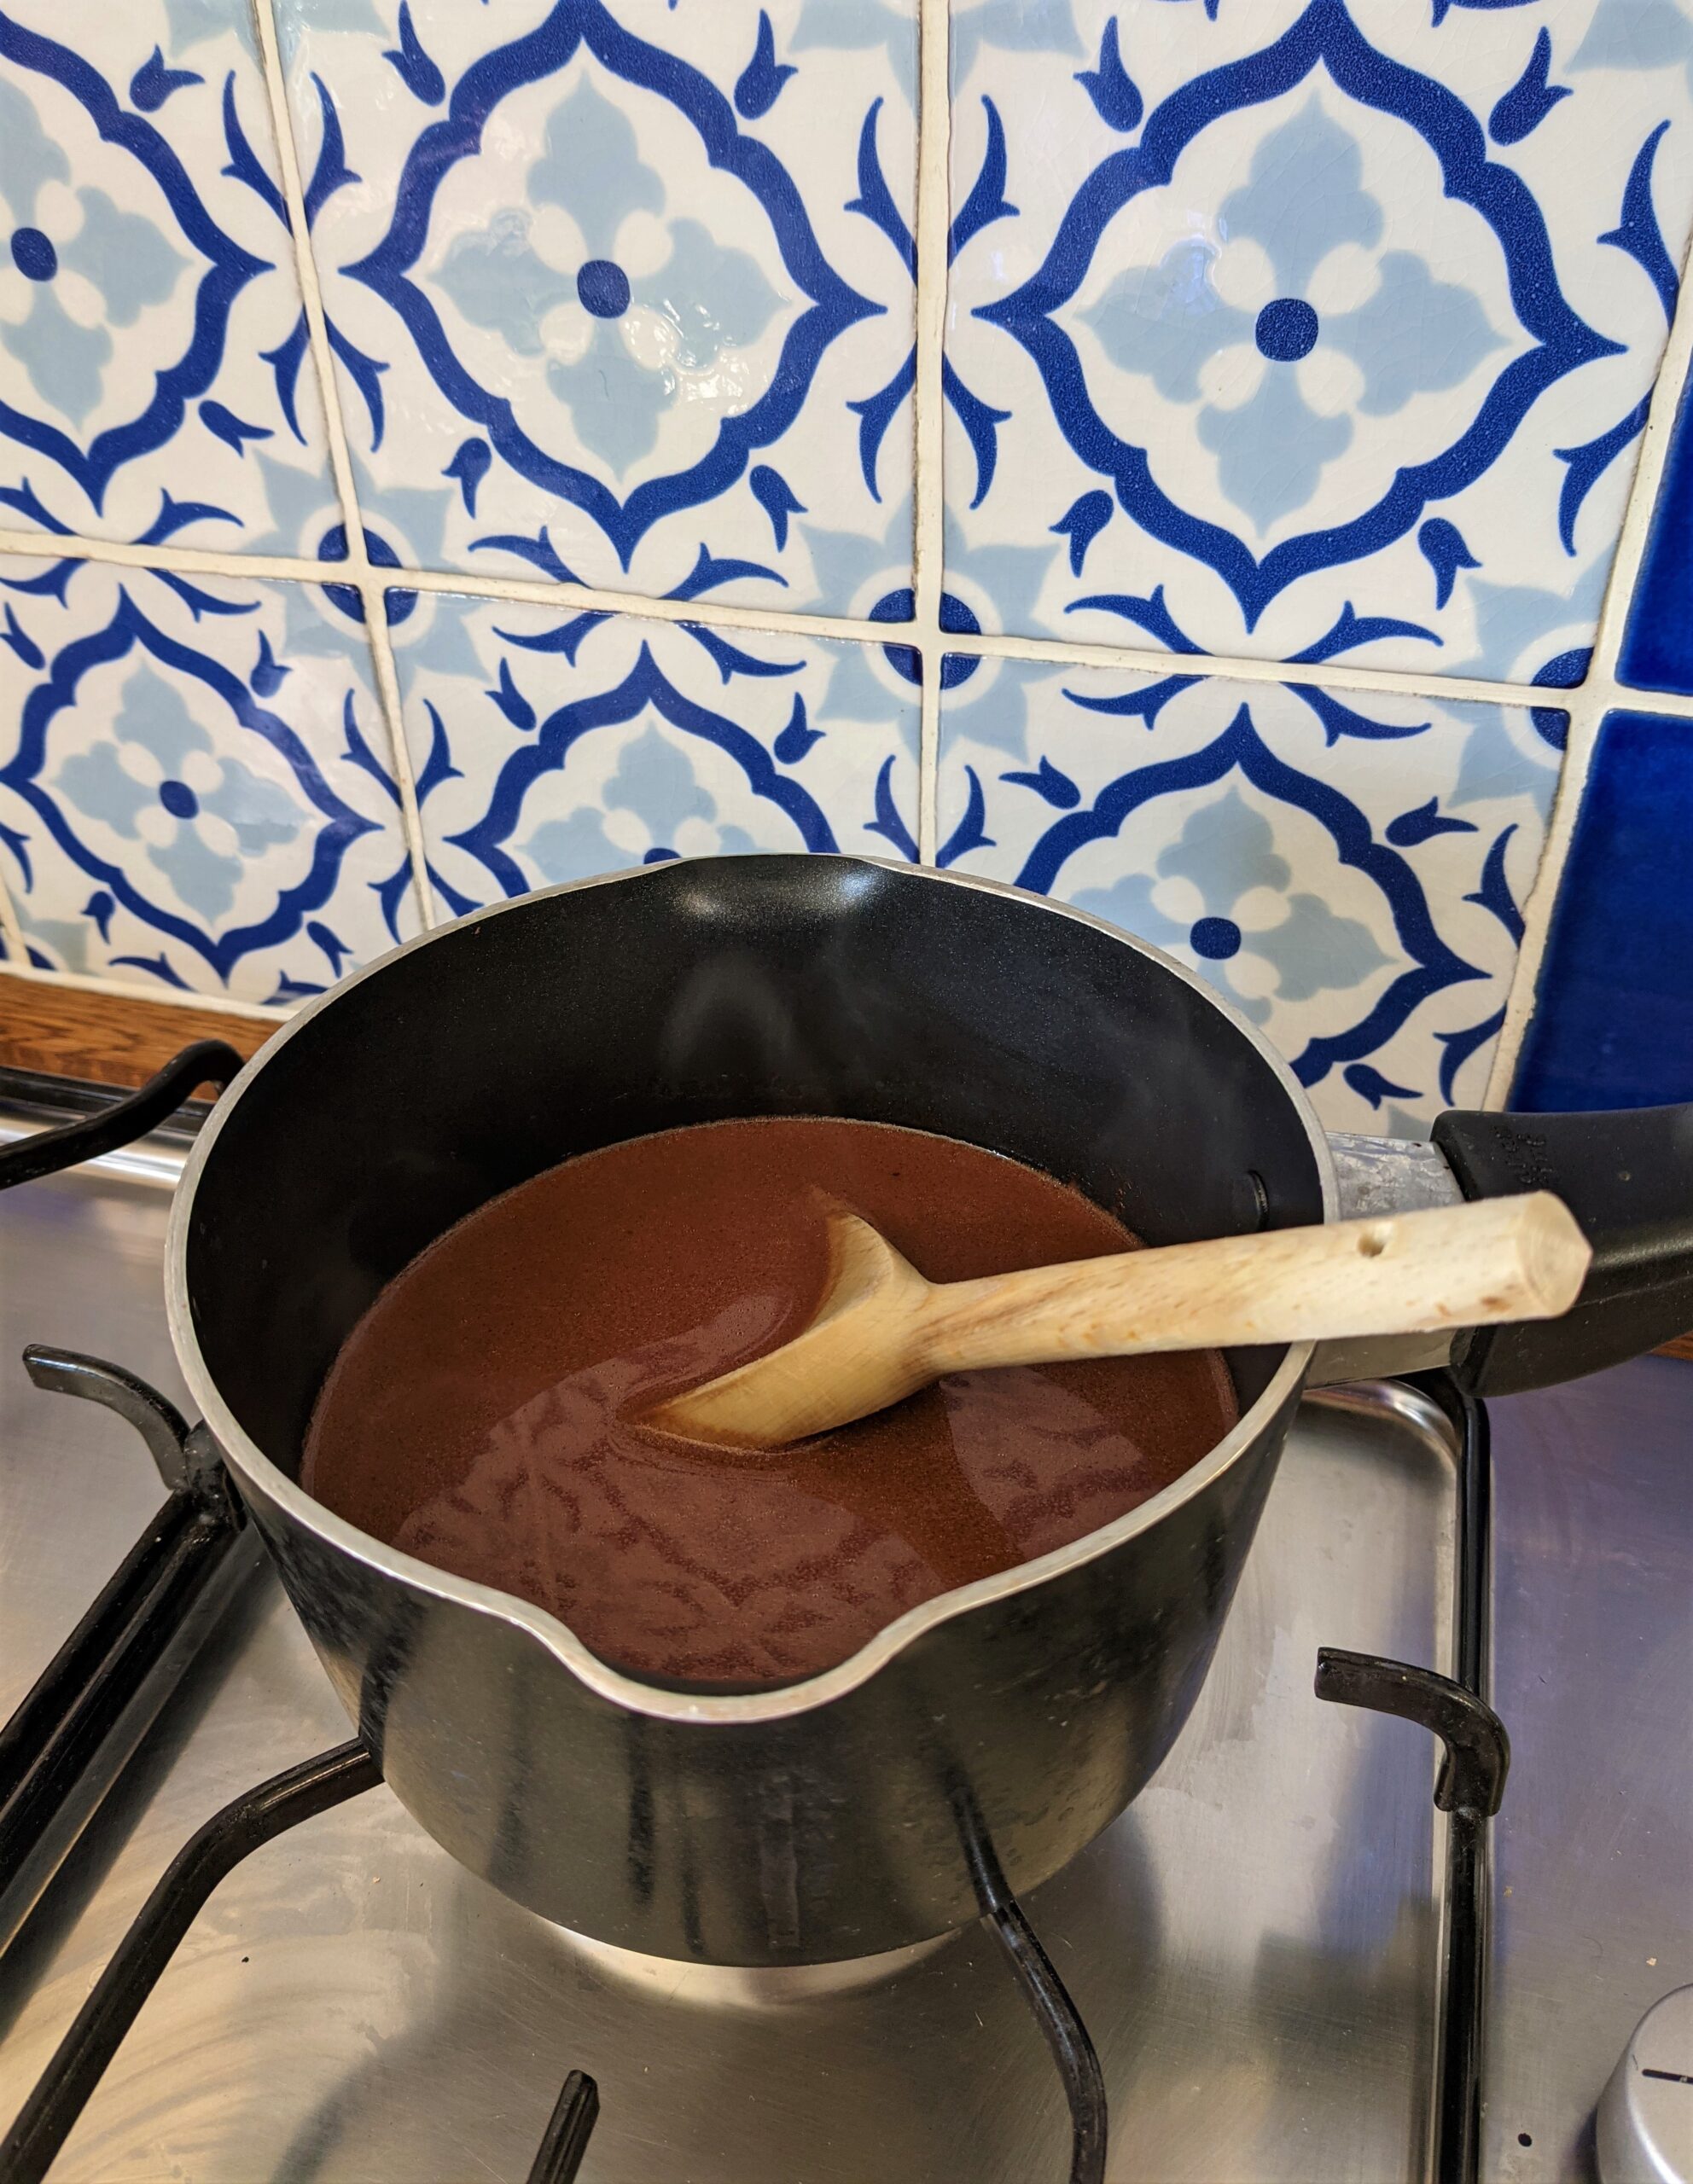 Cooking cacao edited